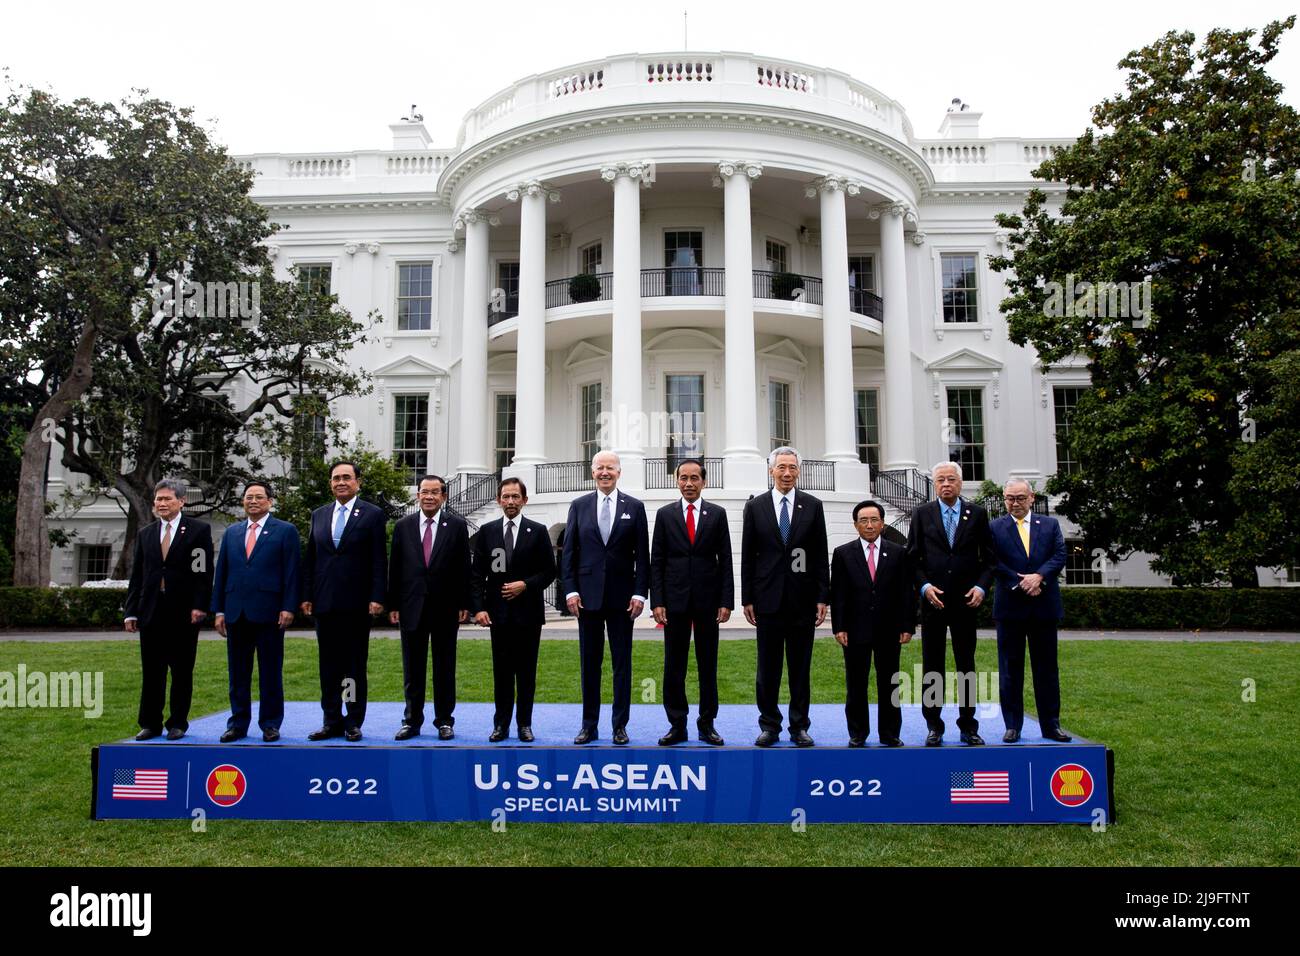 US President Joe Biden (C) poses with leaders of the US-ASEAN Special Summit during a family photo on the South Lawn of the White House in Washington, DC, USA, 12 March 2022. Also in this picture (L to R); Dato Lim Jock Hoi, Secretary-General of the Association for Southeast Asian Nations; Prime Minister of Vietnam Pham Minh Chinh; Prime Minister of Thailand Prayut Chan-o-cha; Prime Minister of Cambodia Hun Sen; Sultan Haji Hassanal Bolkiah of Brunei; President of Indonesia Joko Widodo; Prime Minister of the Republic of Singapore Lee Hsien Loong; Prime Minister of the Lao People's Democratic R Stock Photo